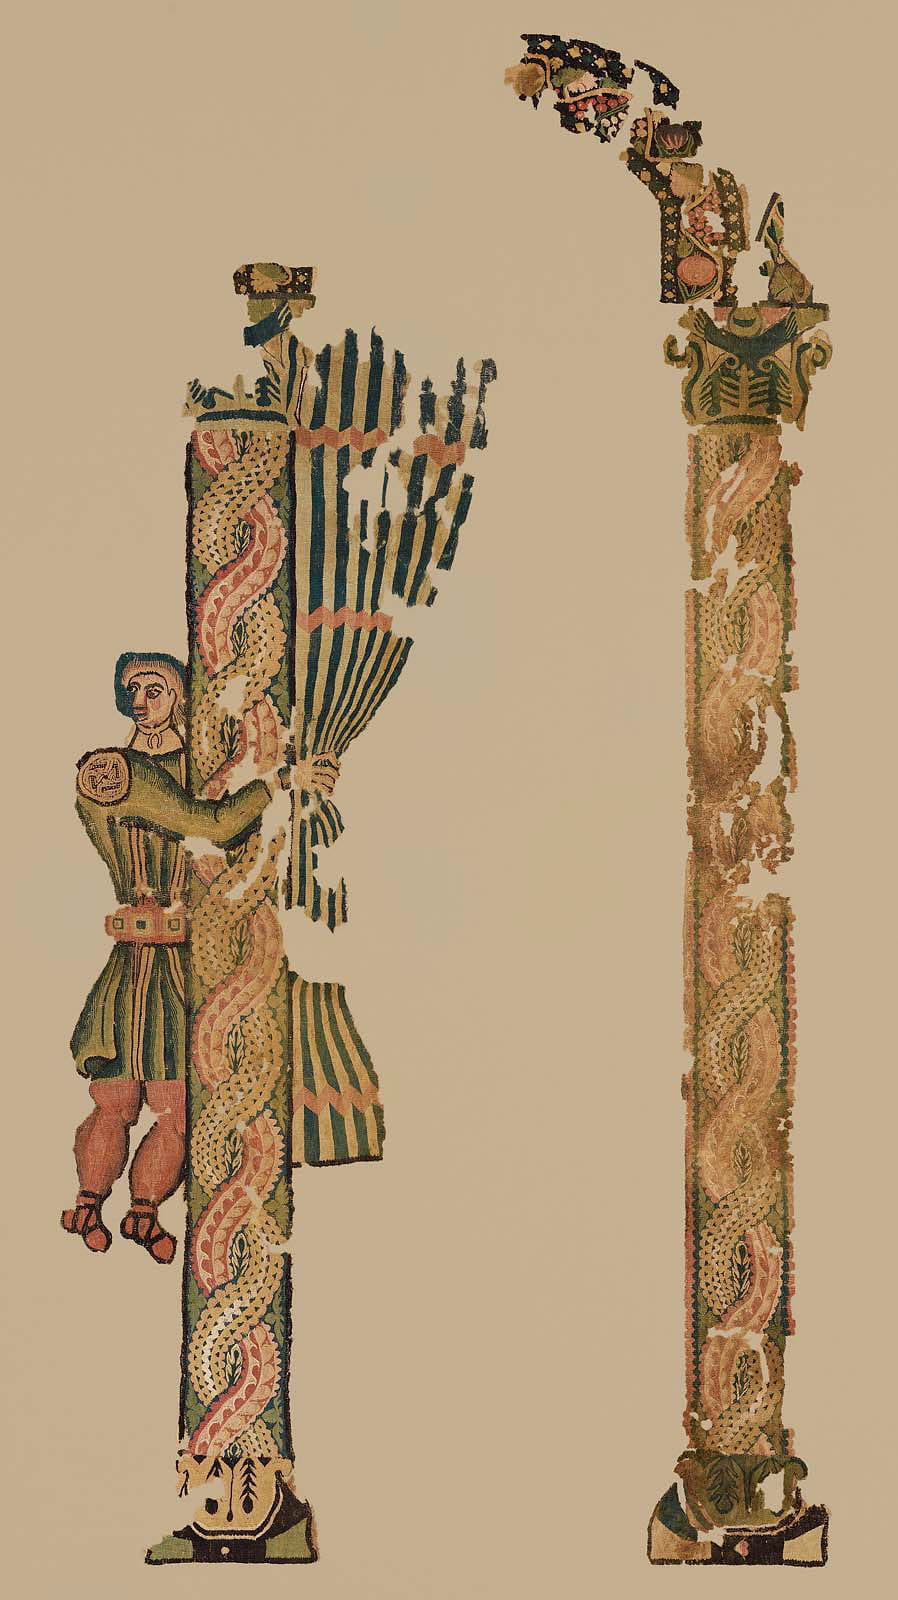 'Designing Identity' has a lot of delightful twists. Take this hanging (fifth century, possibly from Egypt, now belonging to the MFA) with a servant dressed in a tunic who is pulling back a curtain in a stone arcade. How often do premodernists get to see cloth depicted in cloth, let alone alongside stone and flesh and in such vivid polychromy? Elsewhere in the same gallery, there are three complete tunics: one for an adult, one for a child, and one for a doll.